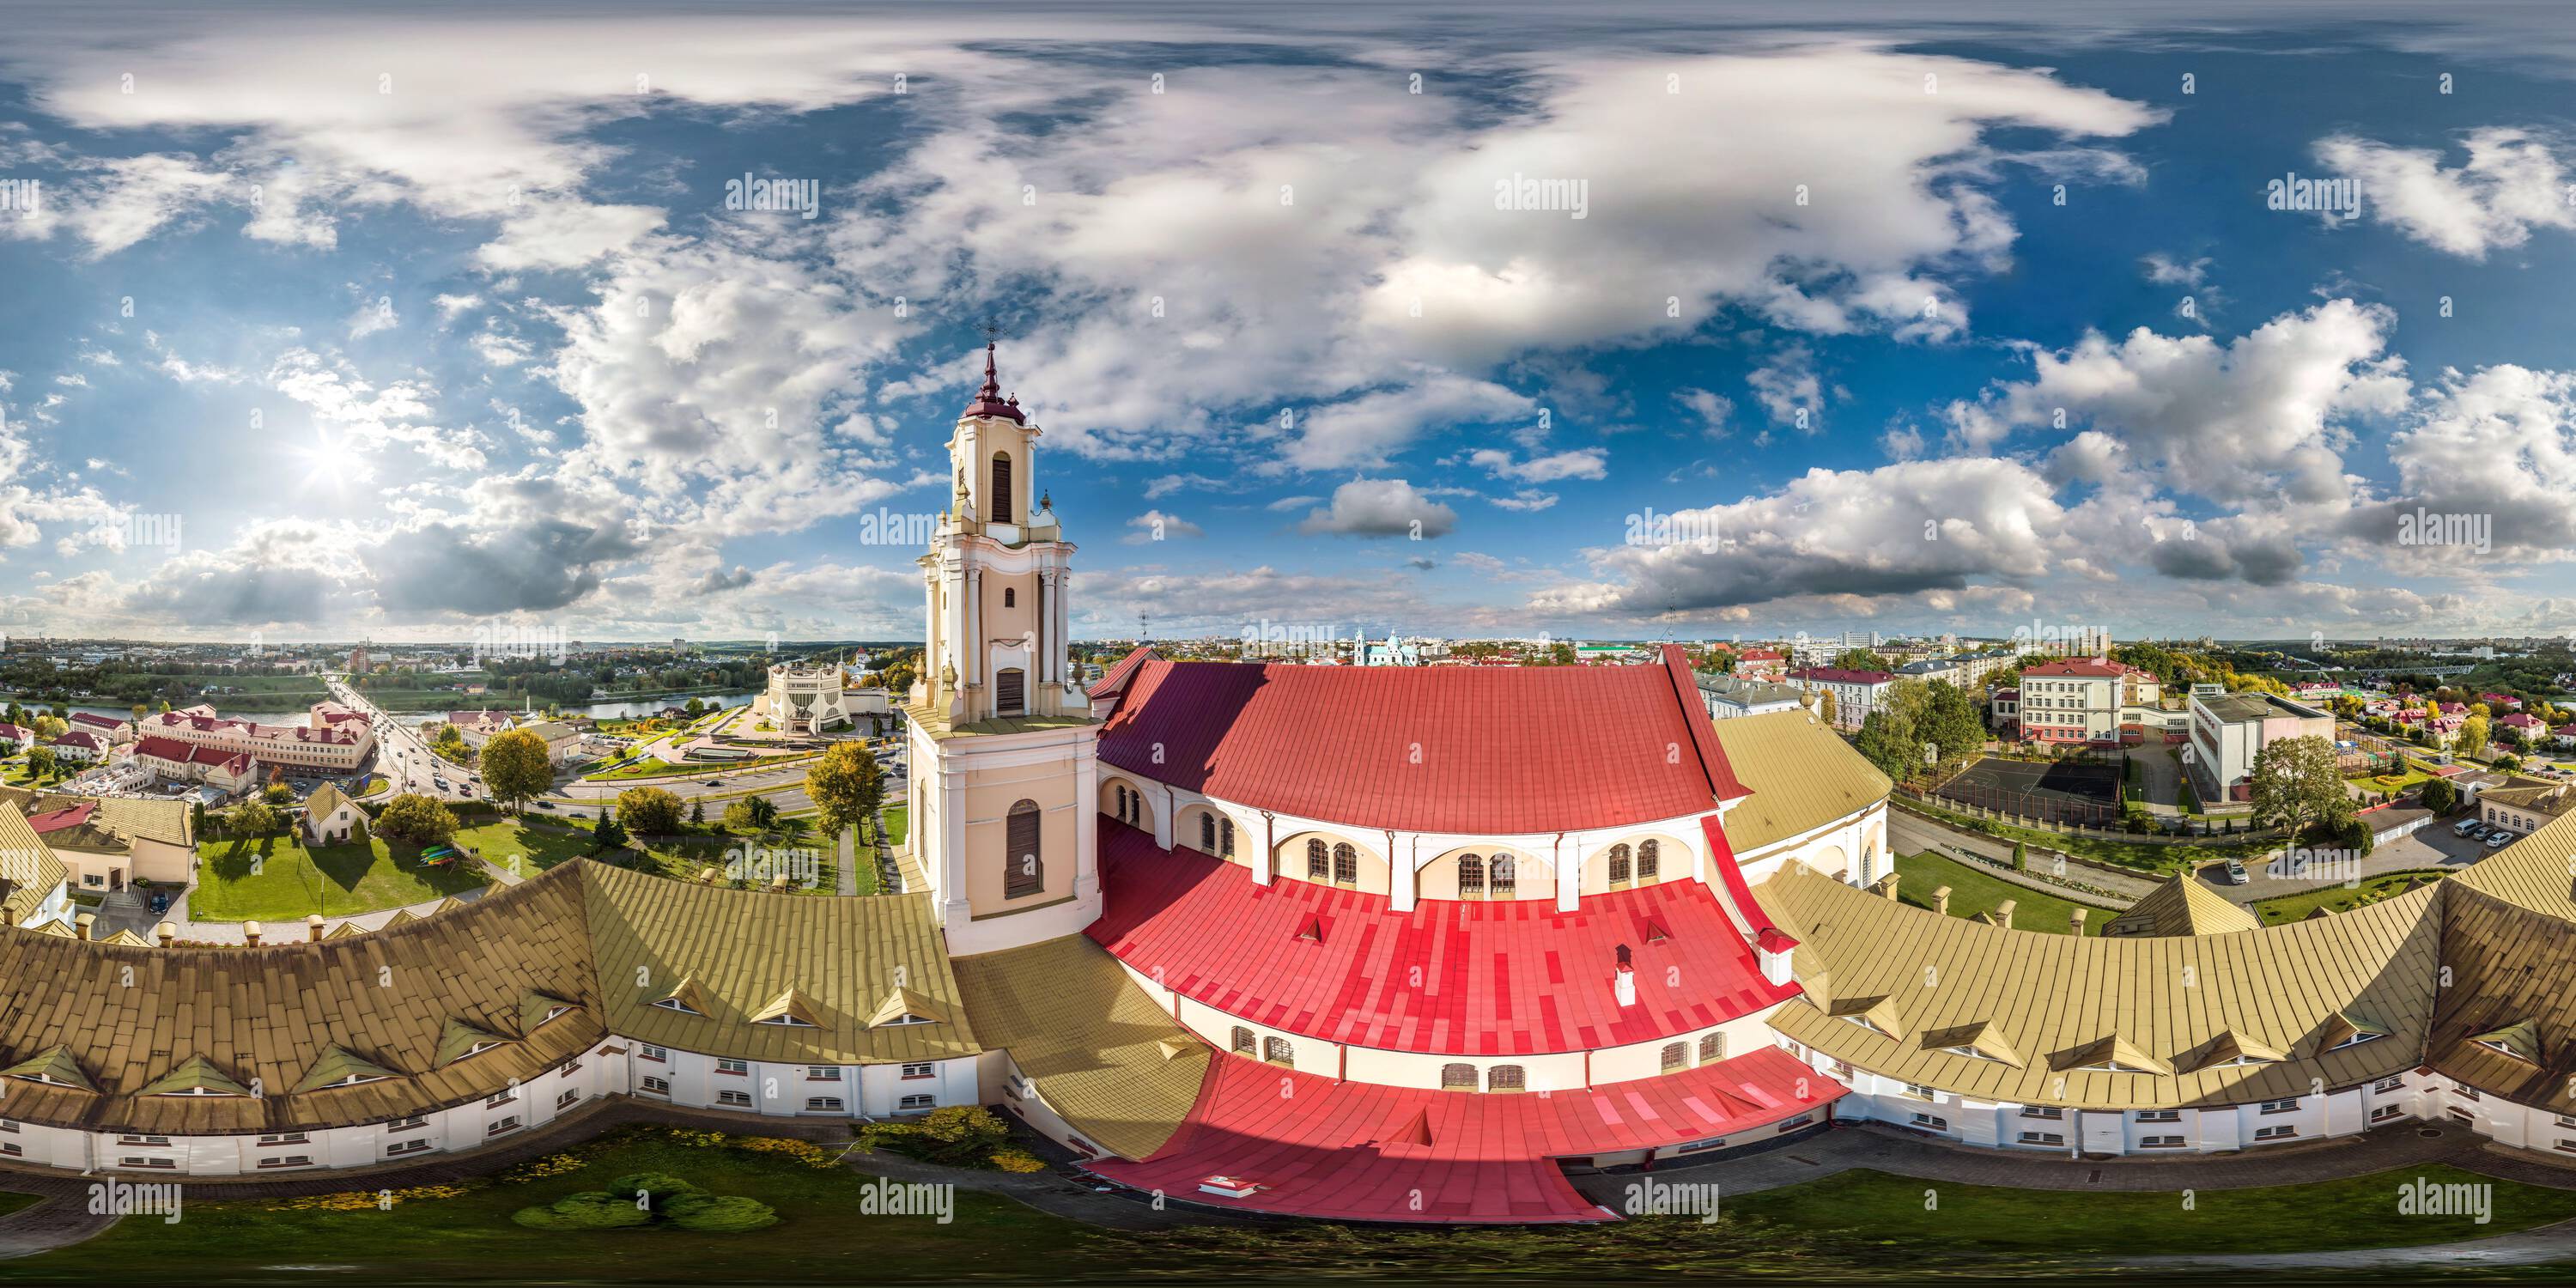 360 degree panoramic view of full hdri 360 panorama aerial view over baroque monastery or catholic church in old city in equirectangular projection with zenith and nadir. VR  AR c